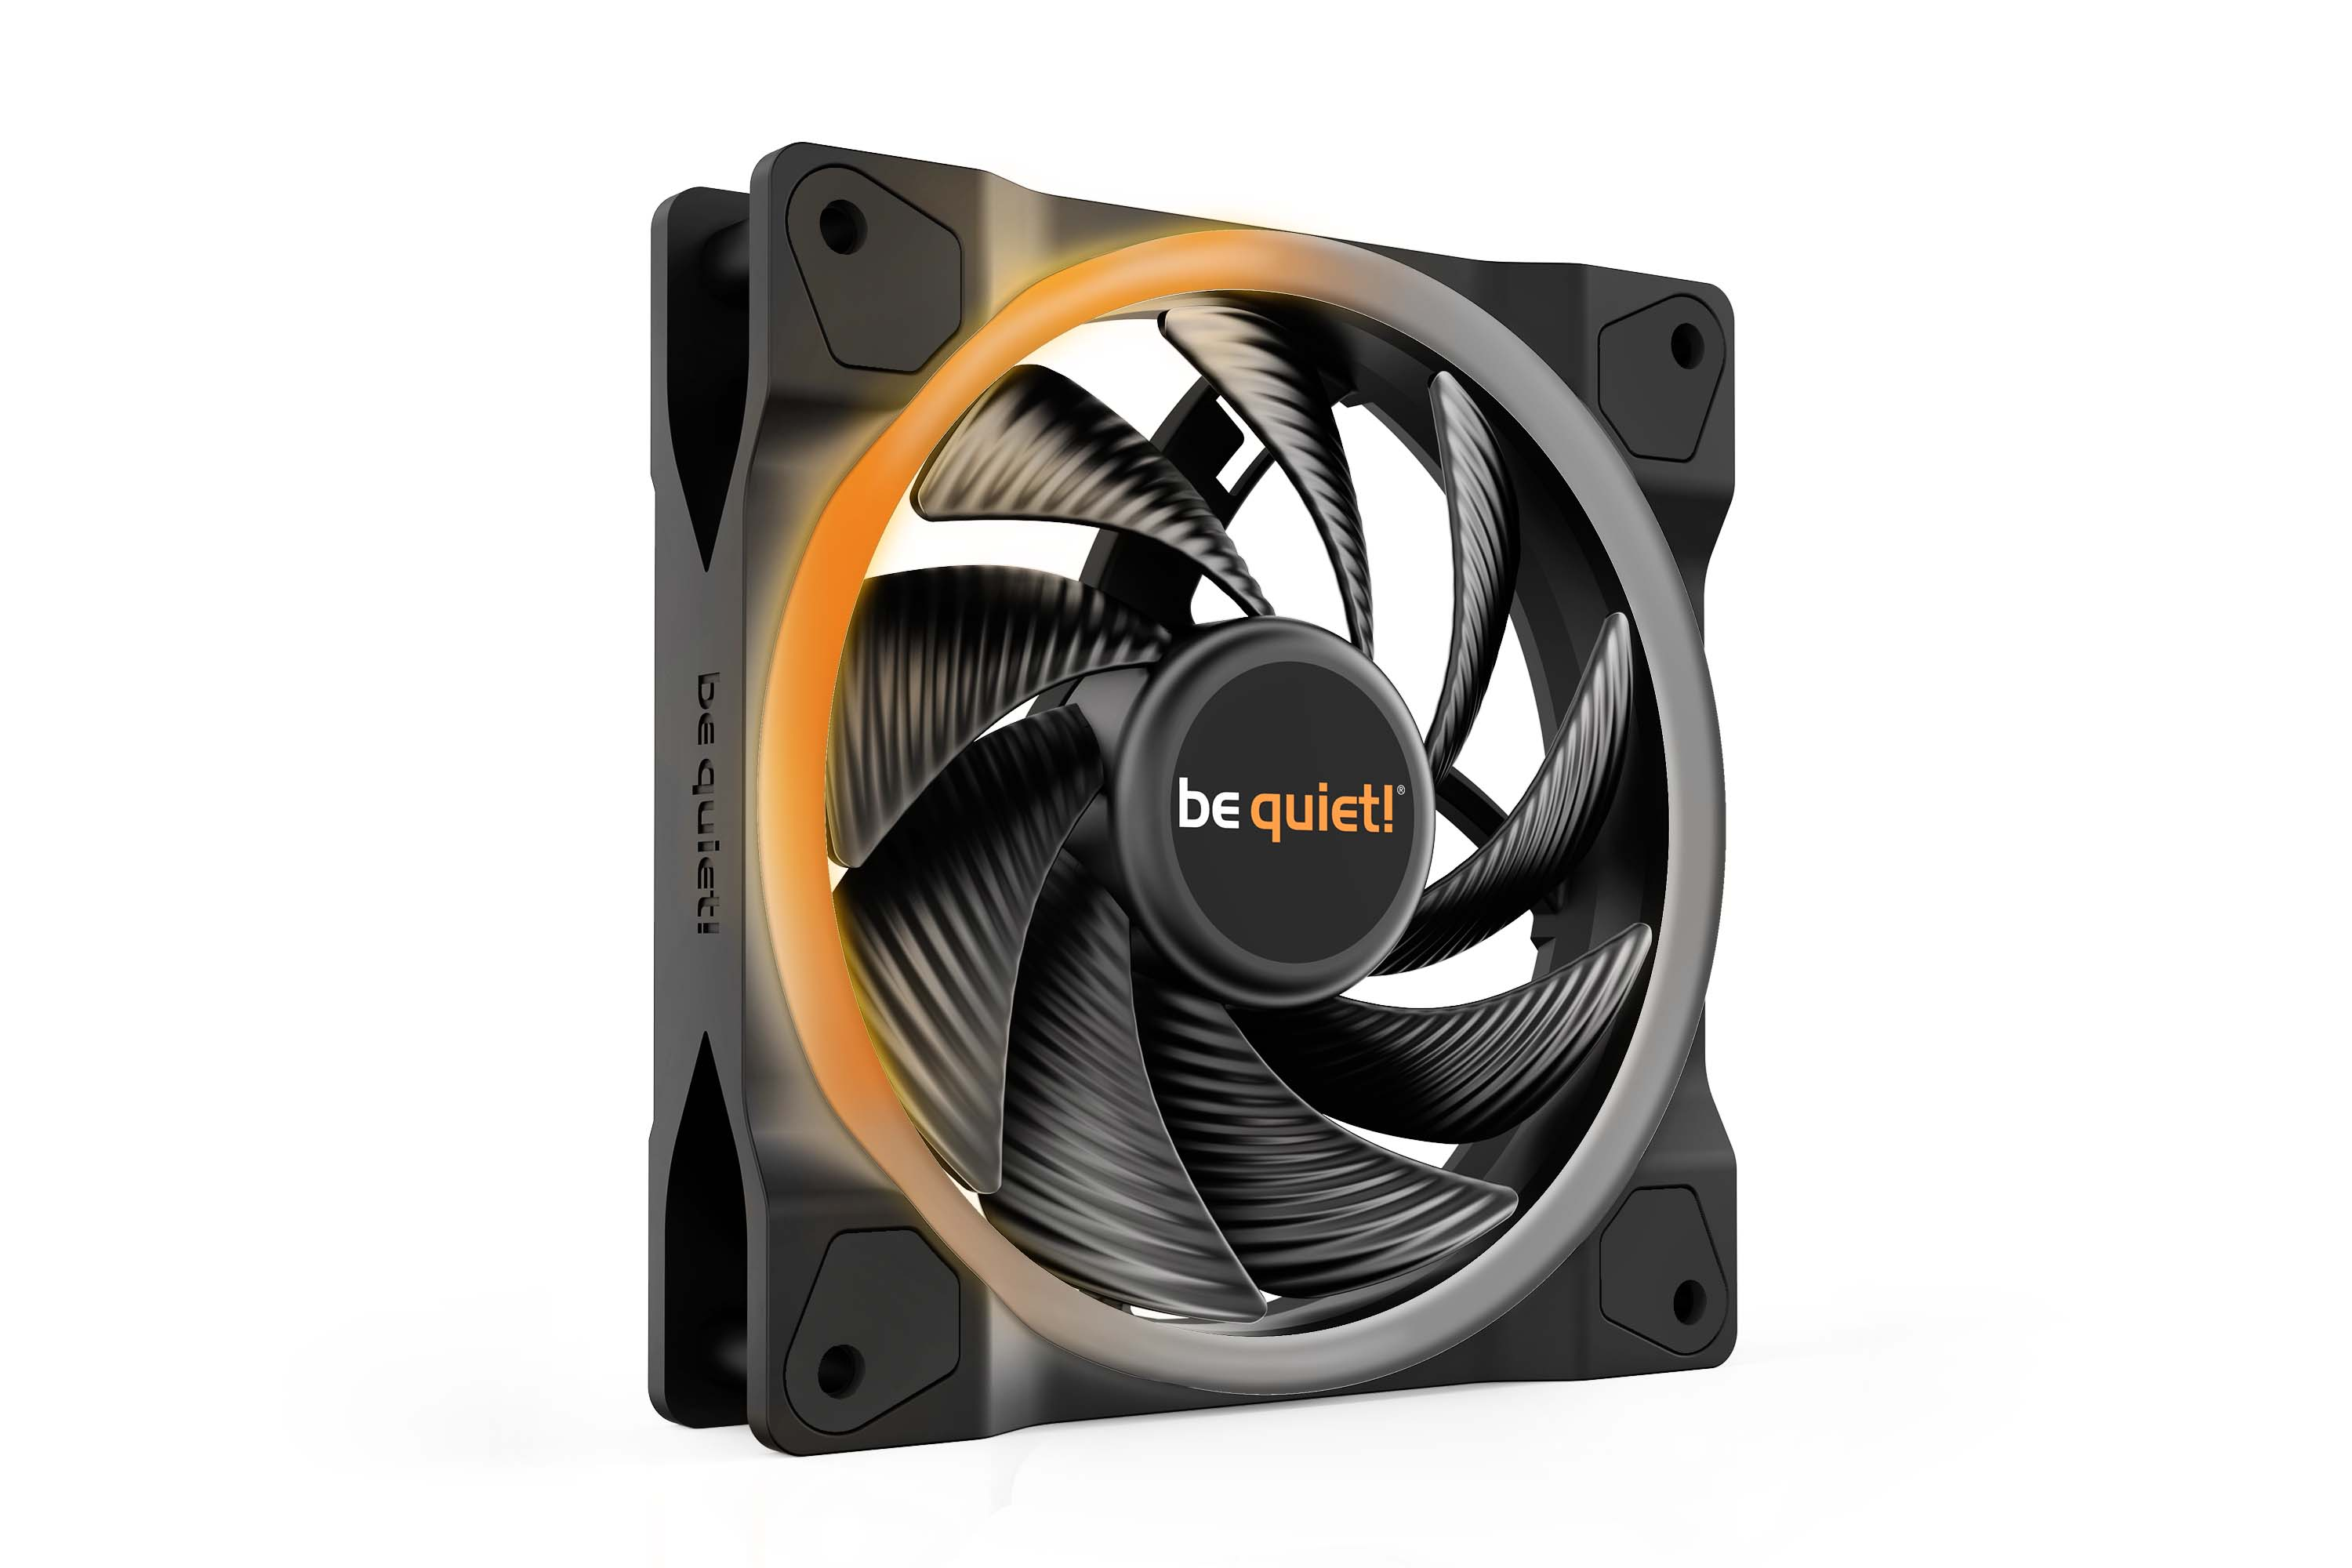 Be quiet! Light Wings 120mm bl073. Вентилятор be quiet 120mm. Вентилятор для корпуса be quiet! Silent Wings 4 120mm PWM High-Speed bl094. Вентилятор be quiet PWM 120mm. Pwm high speed